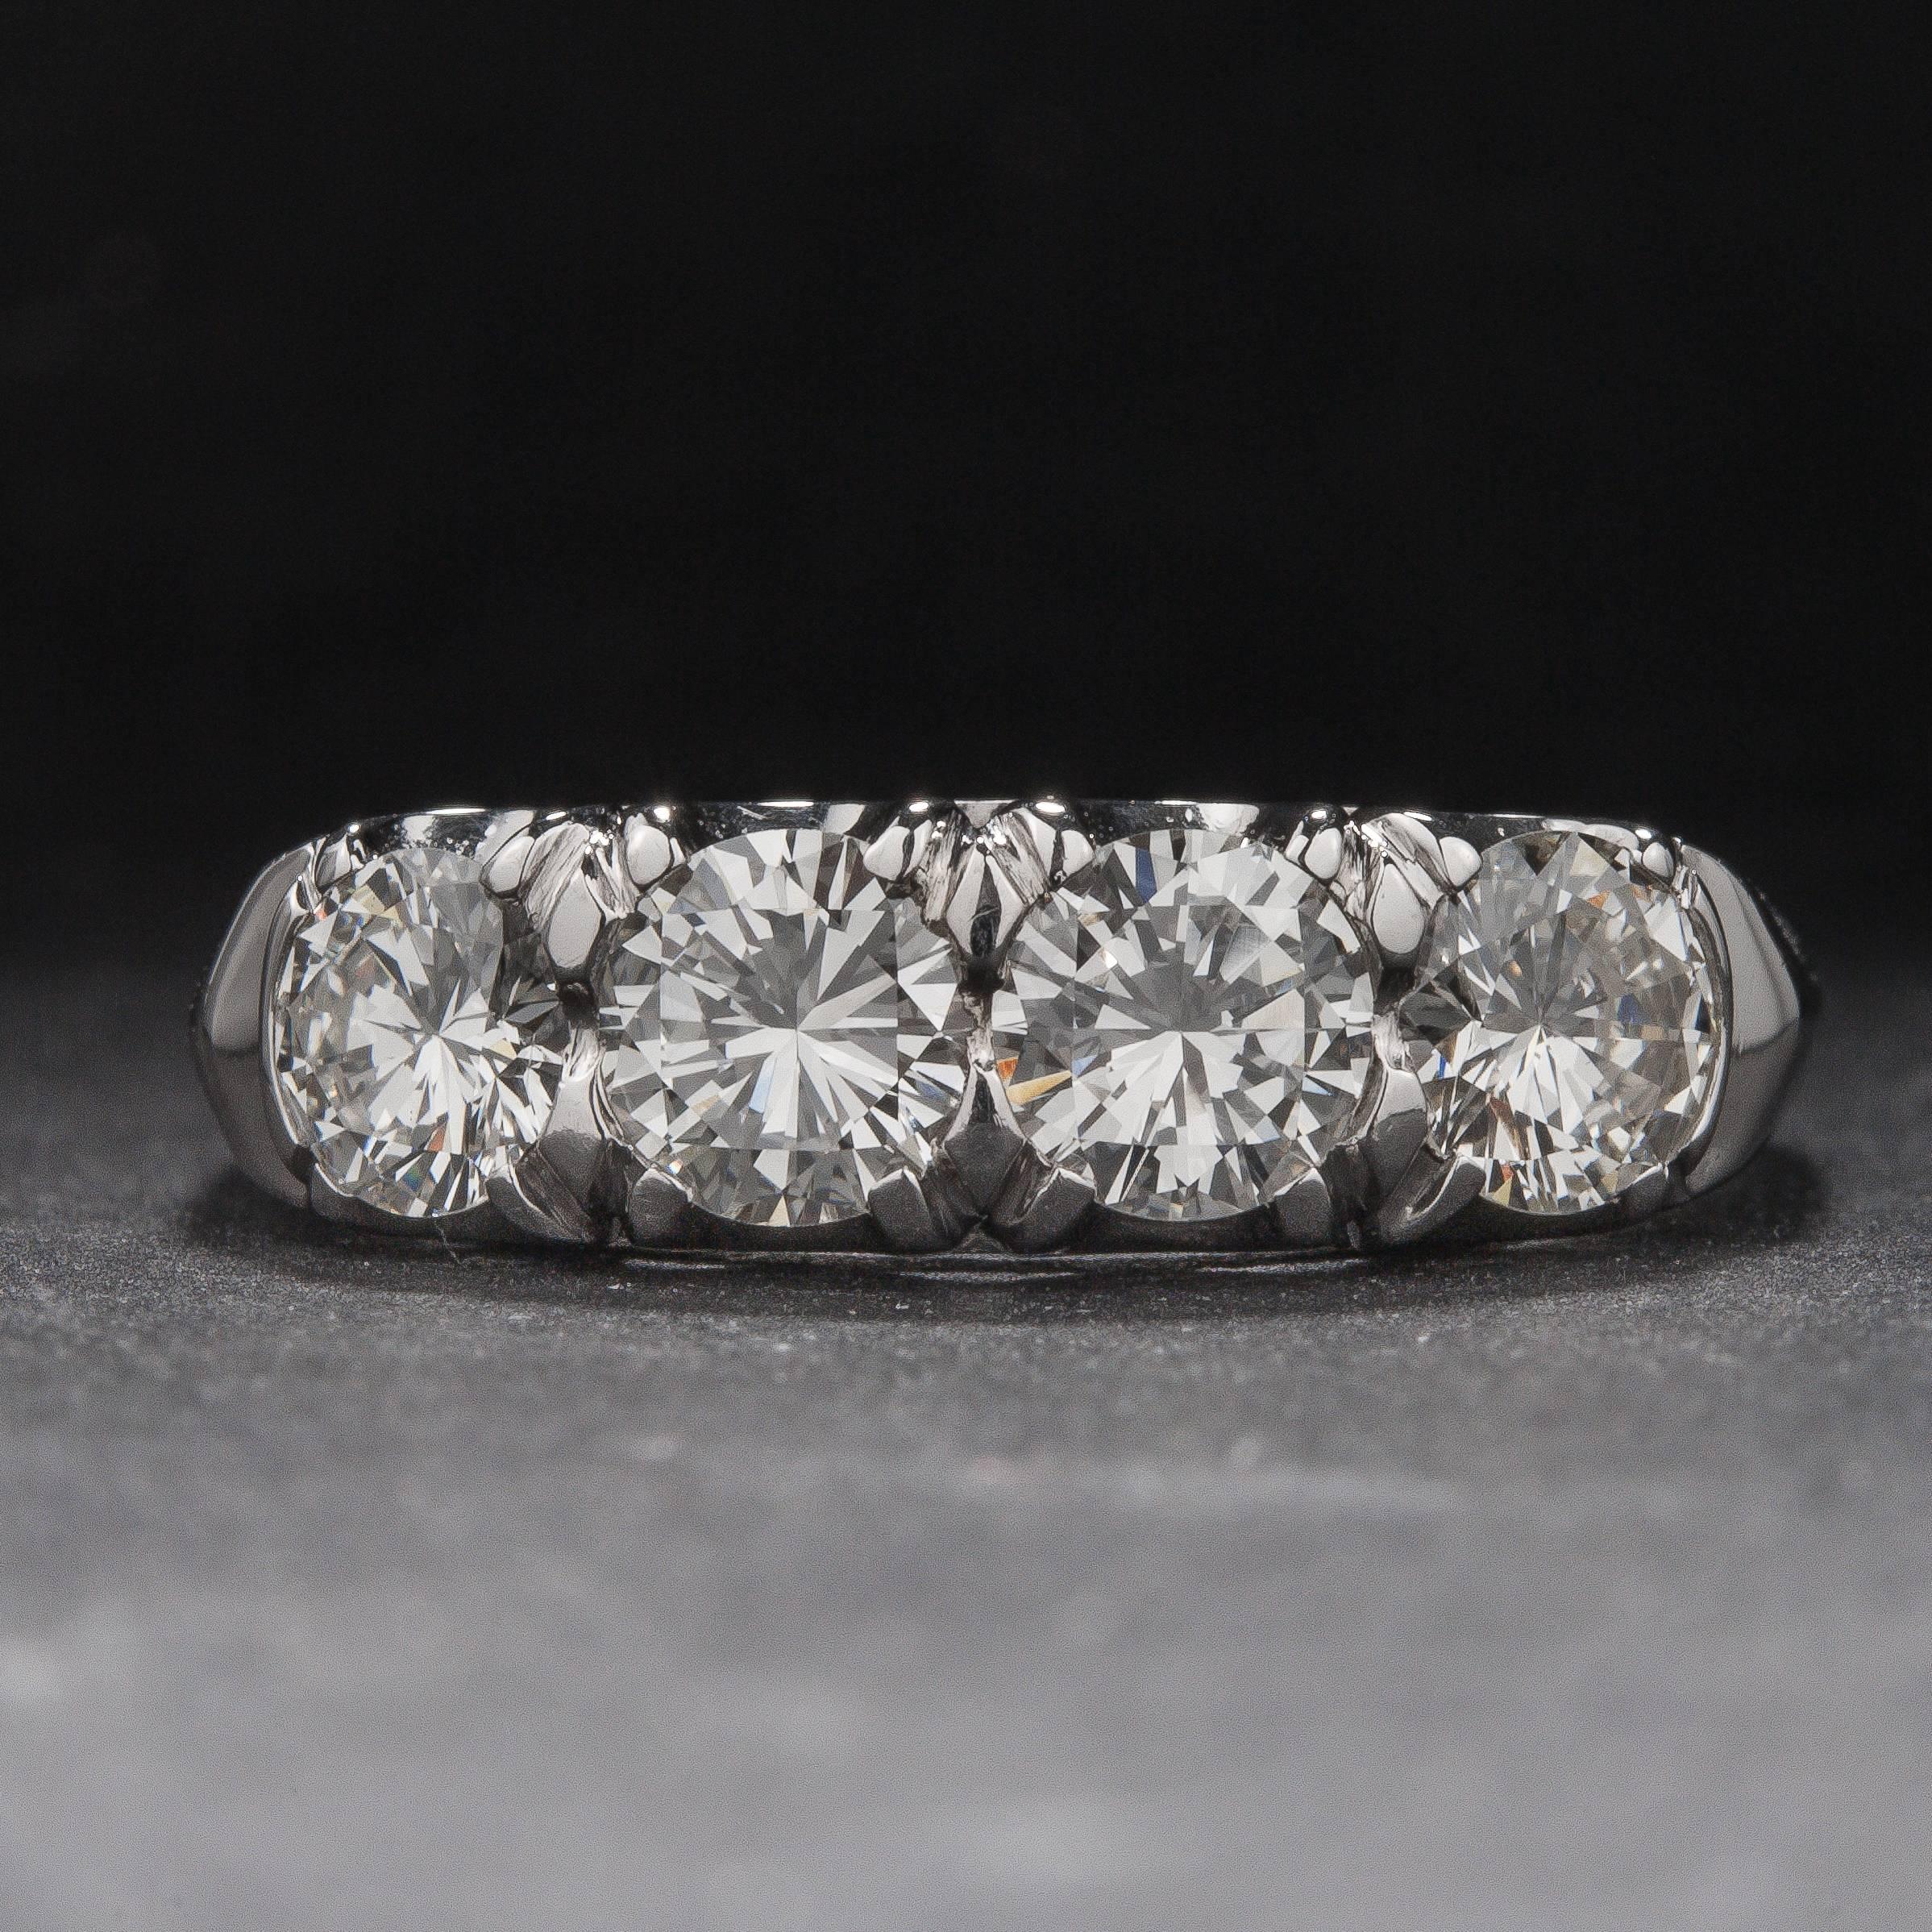 This bold 4-stone ring features 4 diamonds weighing a total of 1.20 carats. The mounting is crafted in 14k white gold and is currently size 8. This ring may be sized to fit.